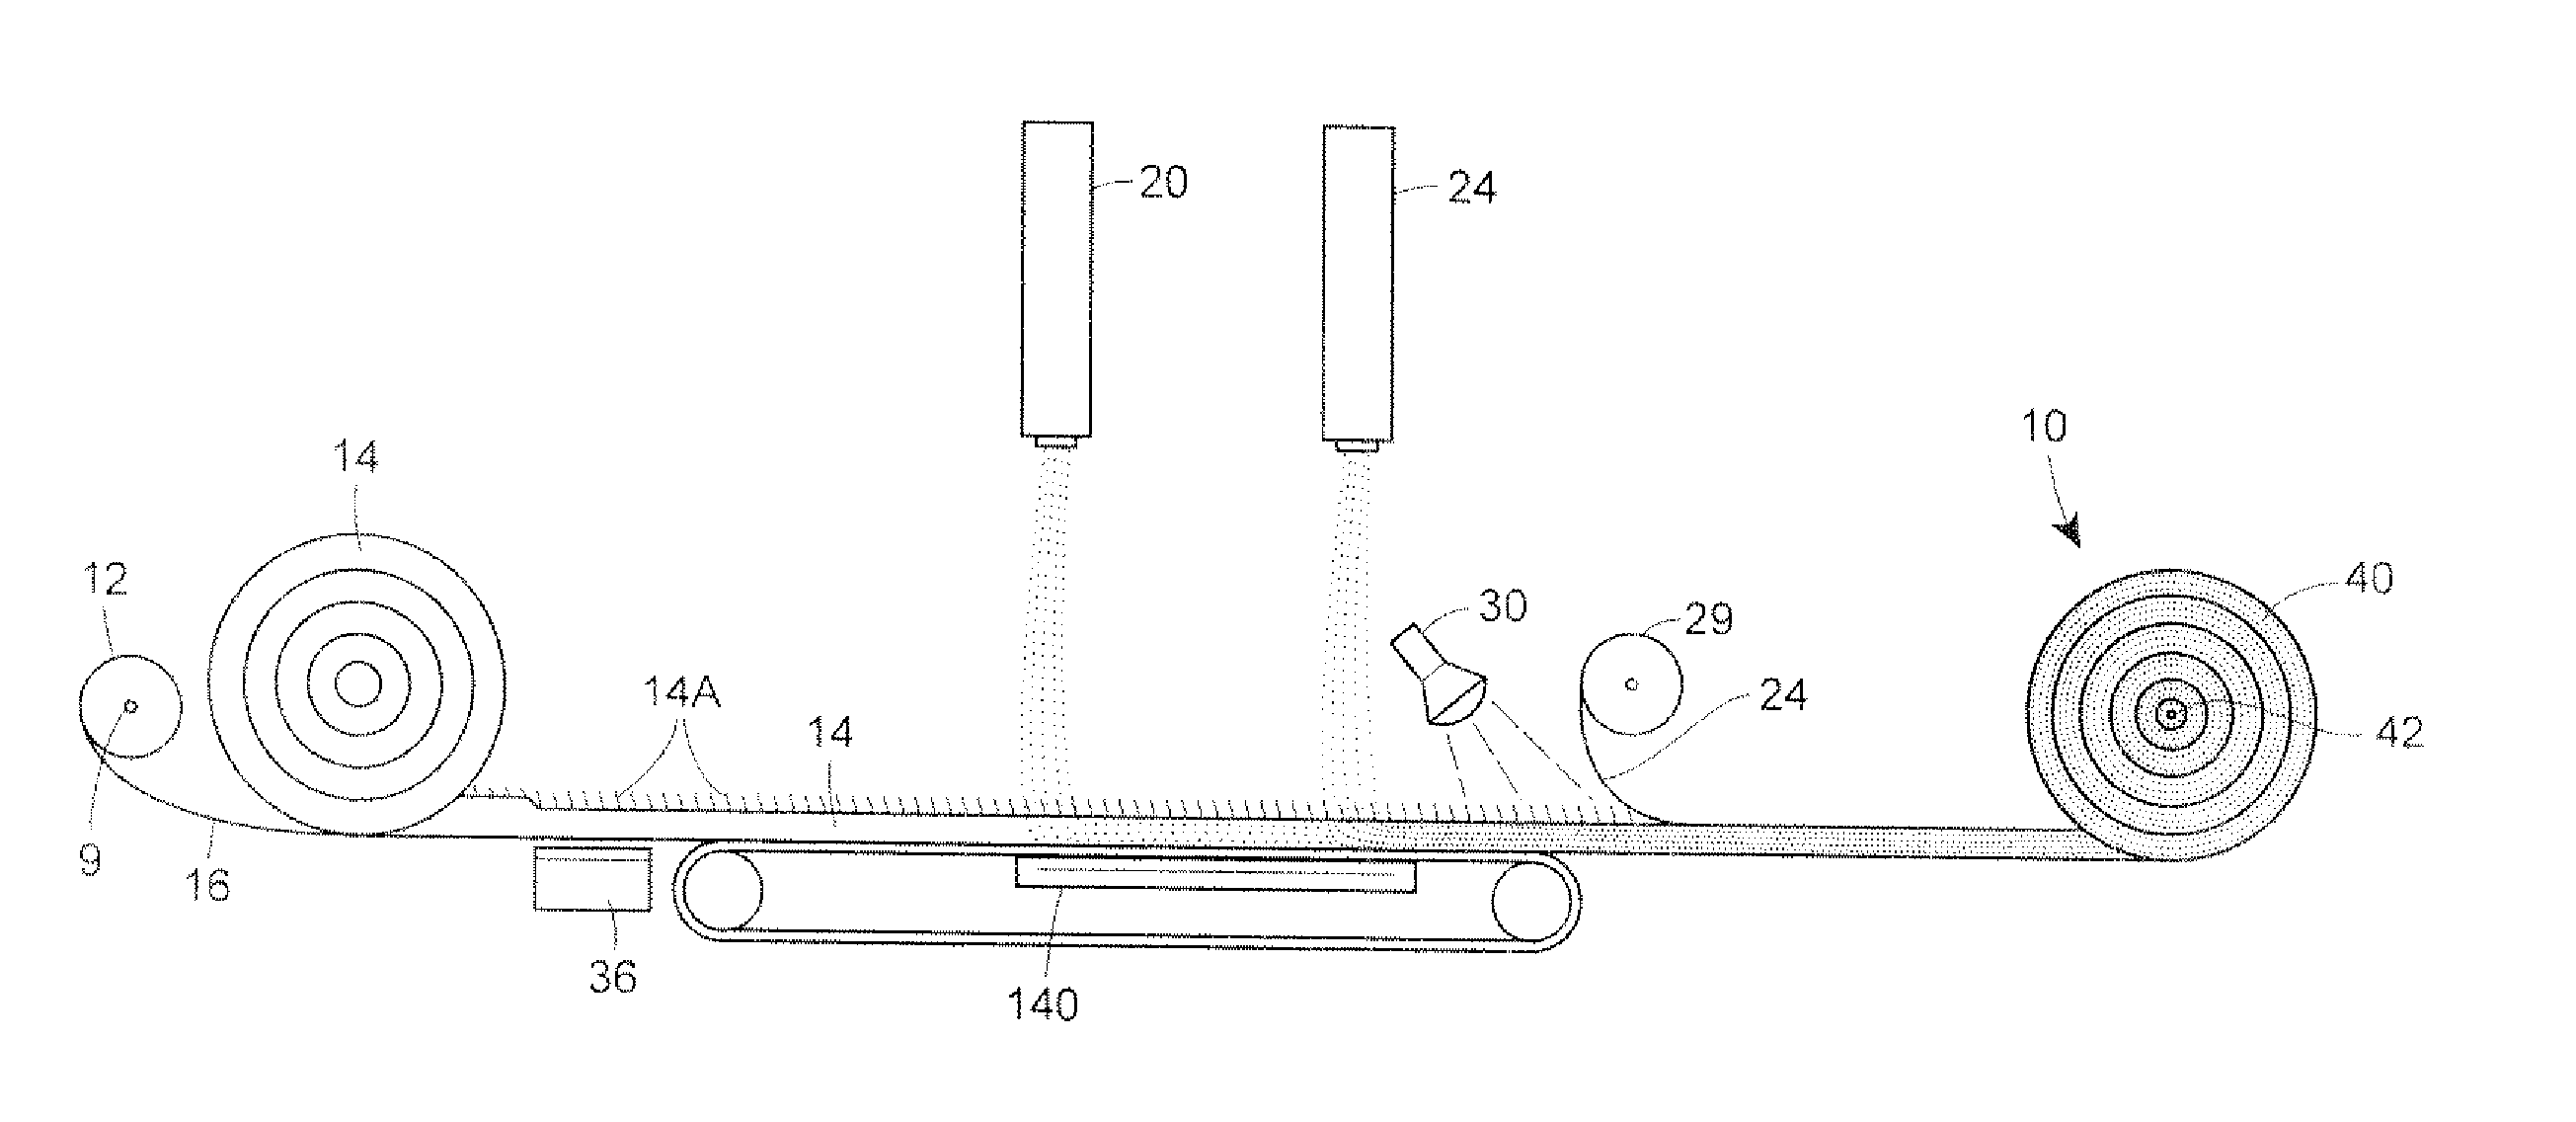 Contaminant-reactive geocomposite mat and method of manufacture and use